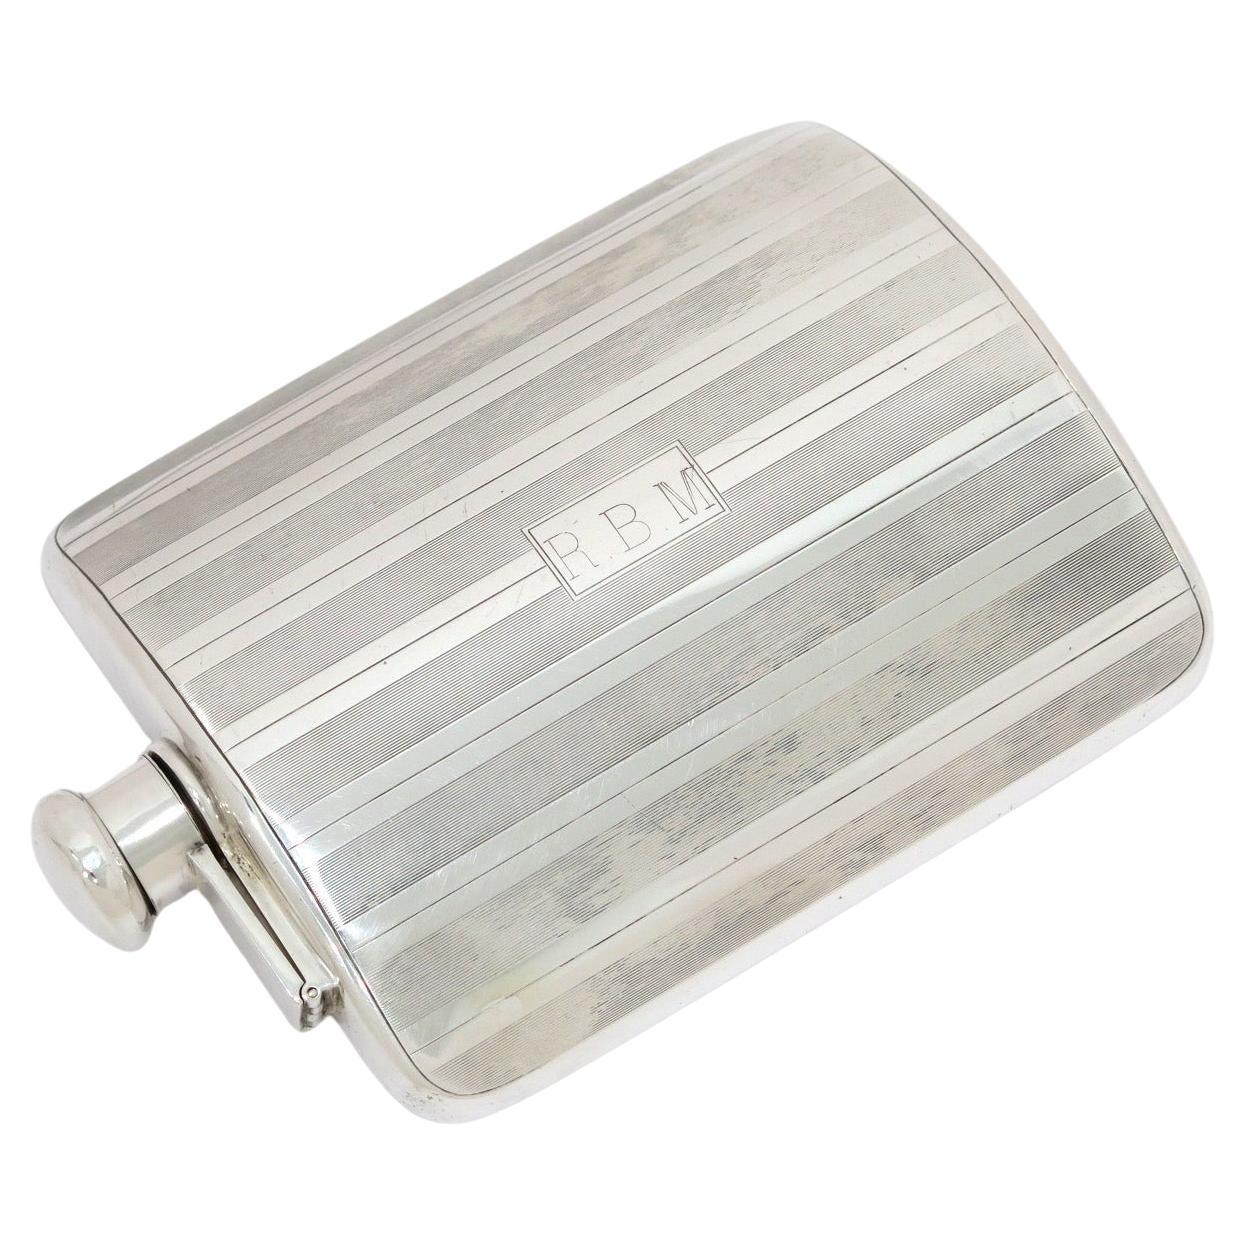 6.25 in - Sterling Silver Tiffany & Co. Antique Striped Flask For Sale